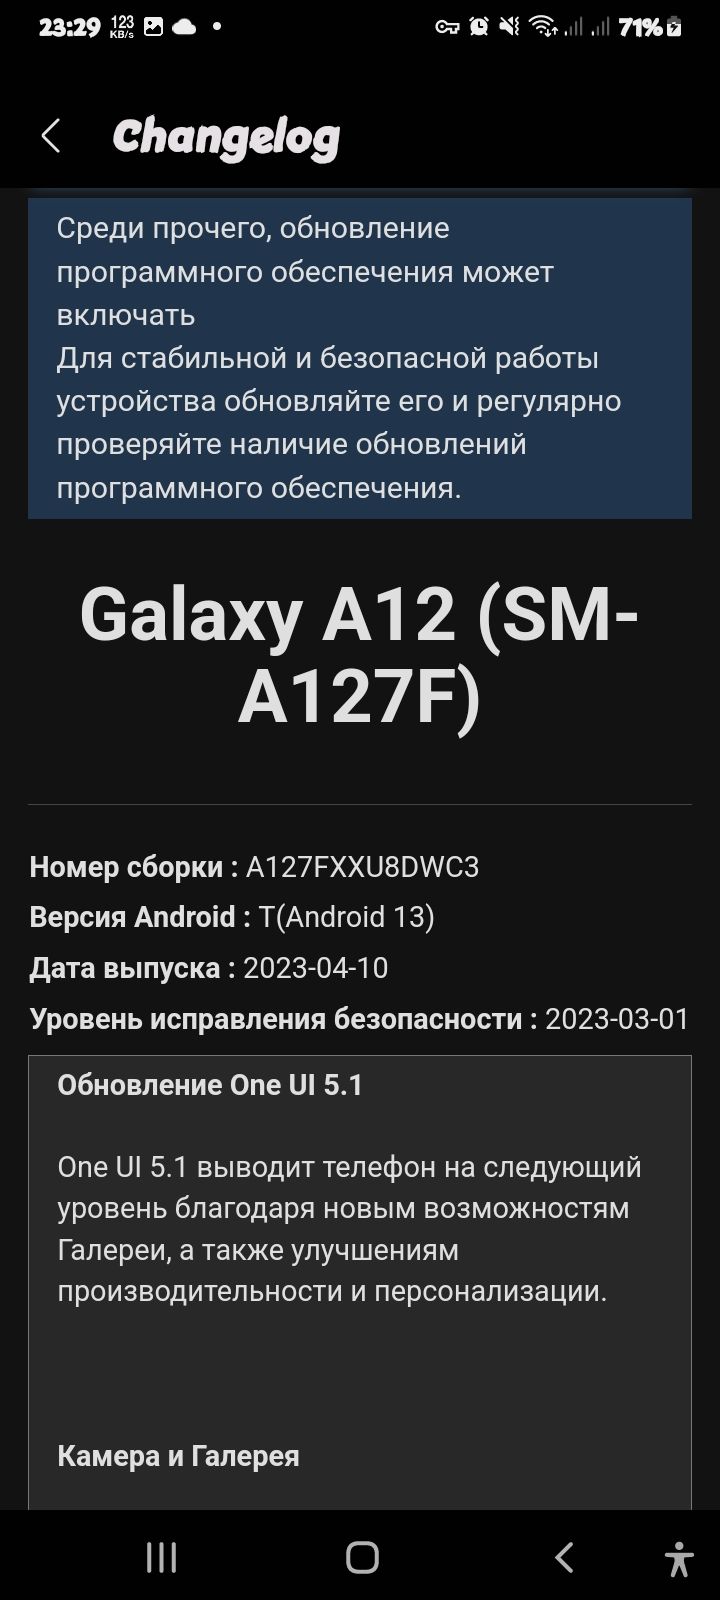 Samsung is rolling out One Ui Core 5.1 for Galaxy ... - Samsung Members